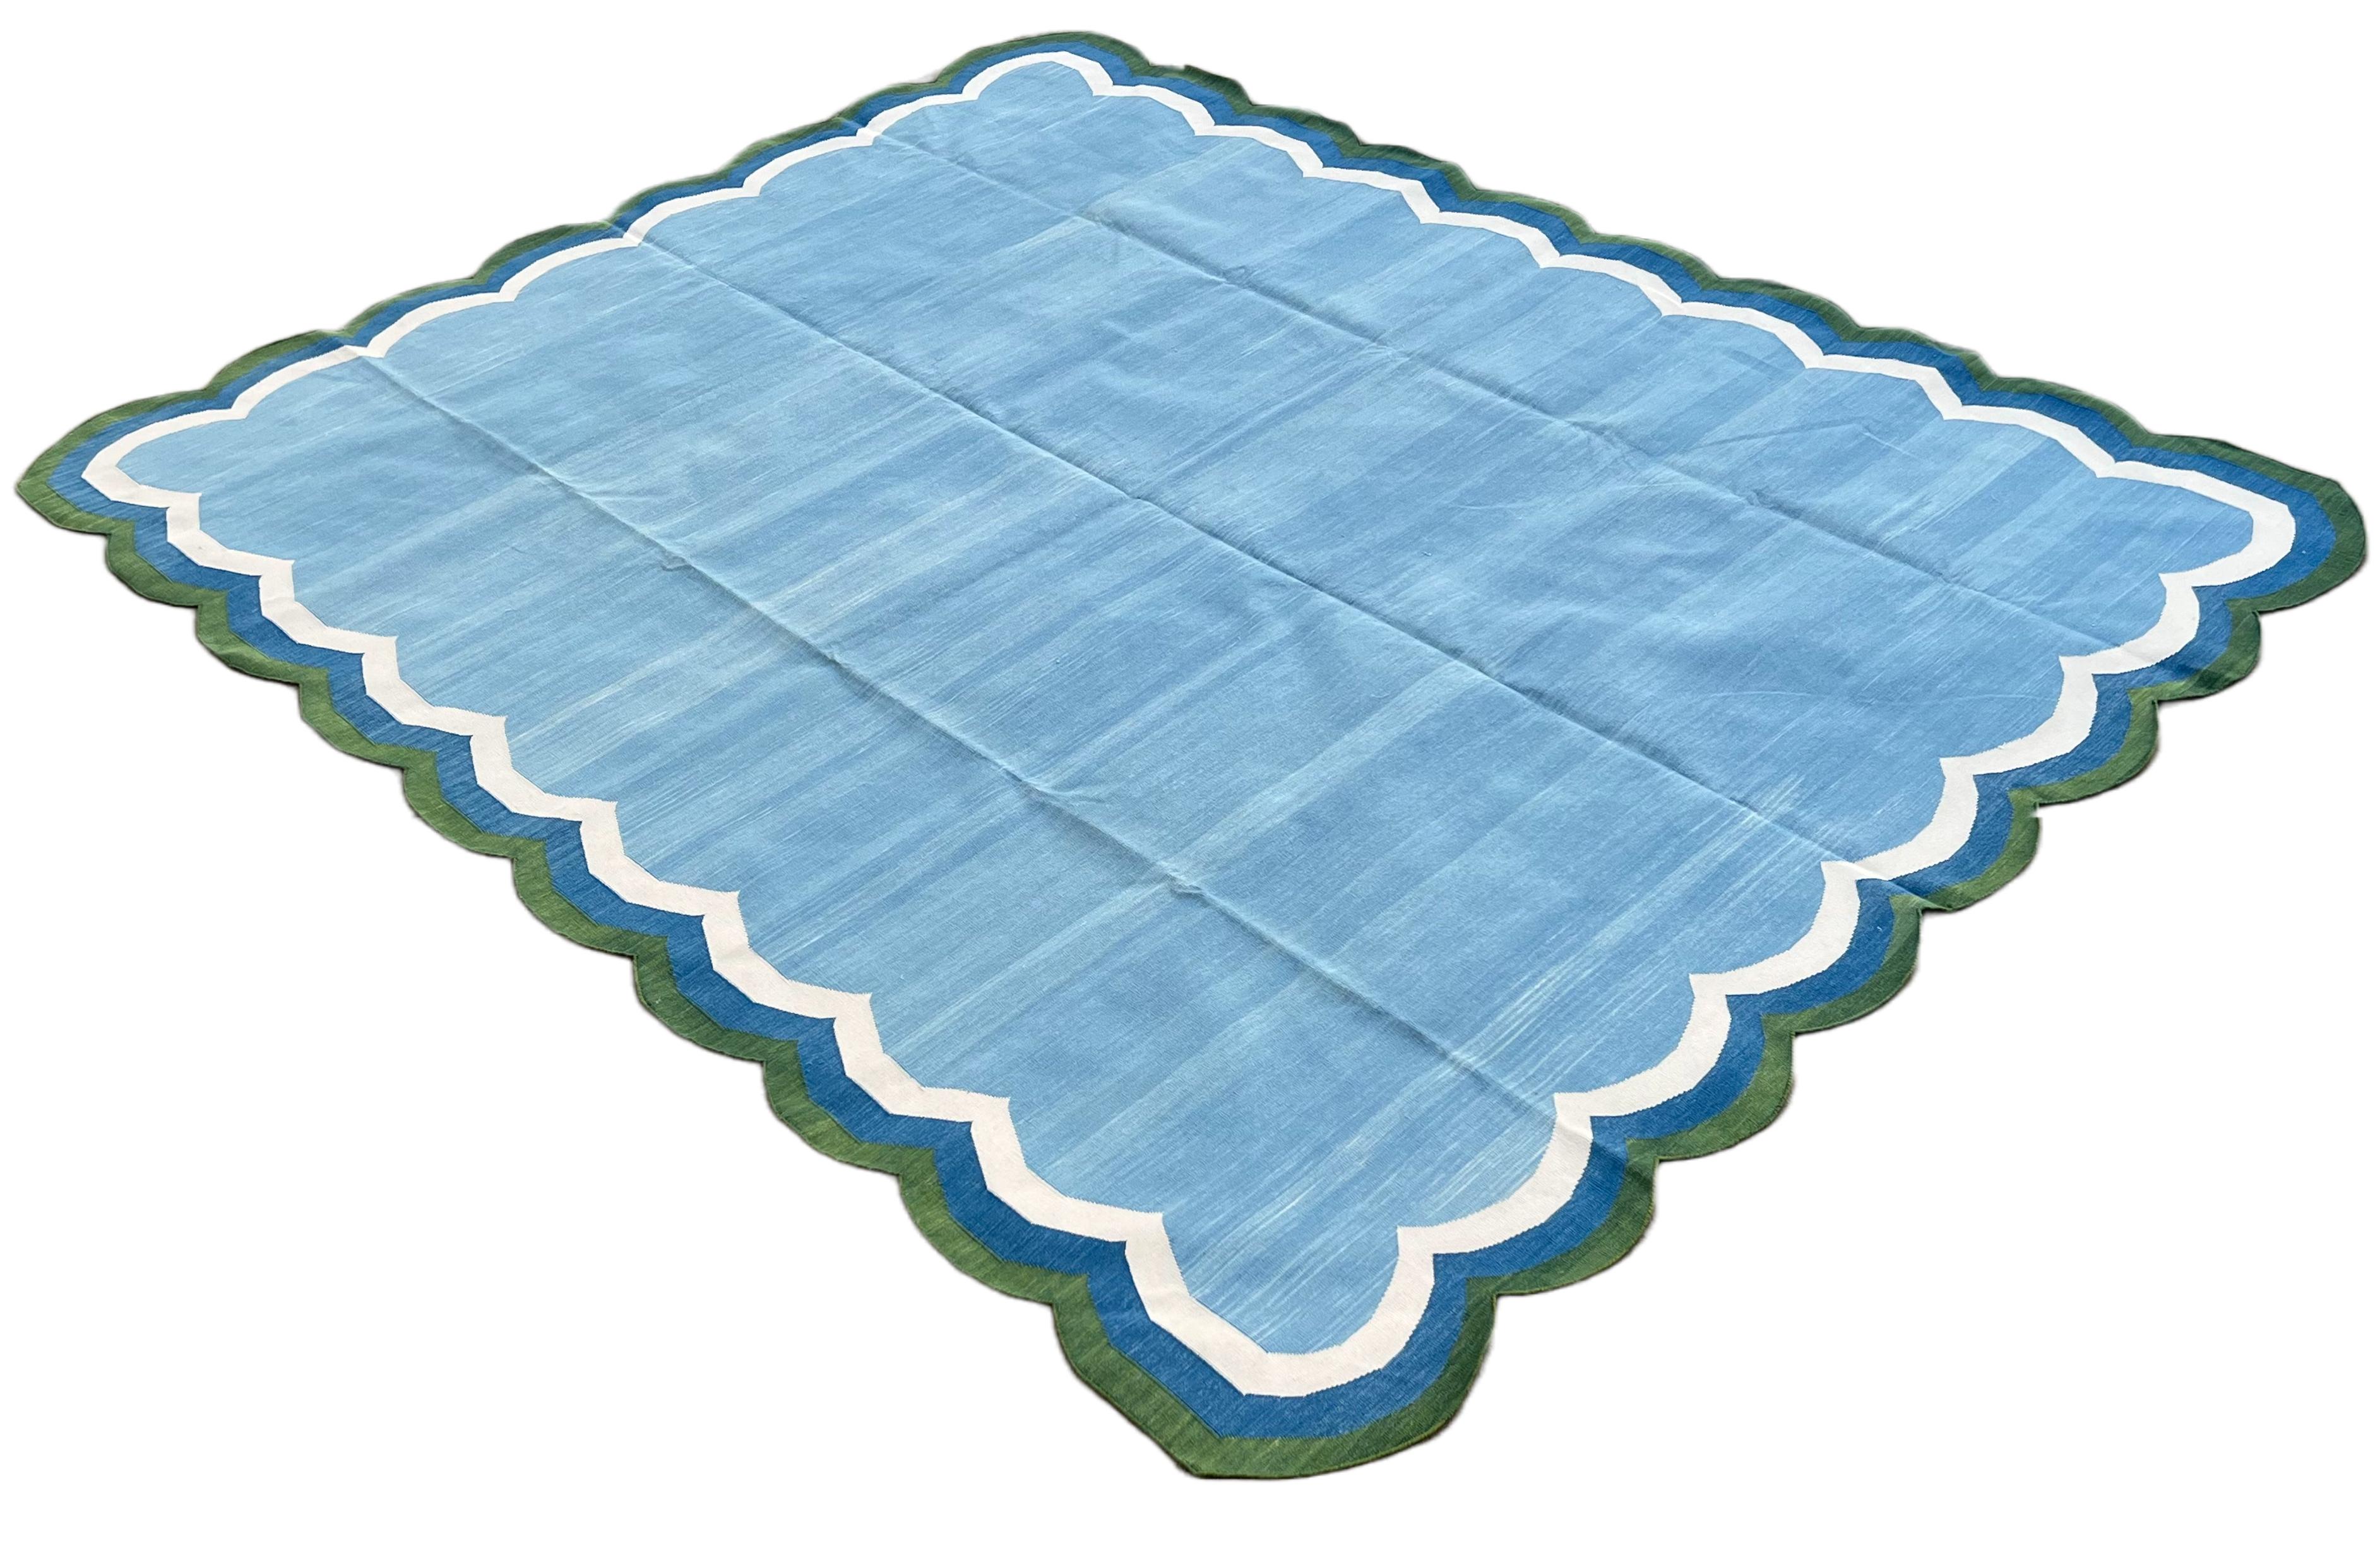 Cotton Vegetable Dyed Sky Blue and Green 4 Sided Indian Scalloped Rug - 8'x10'
These special flat-weave dhurries are hand-woven with 15 ply 100% cotton yarn. Due to the special manufacturing techniques used to create our rugs, the size and color of